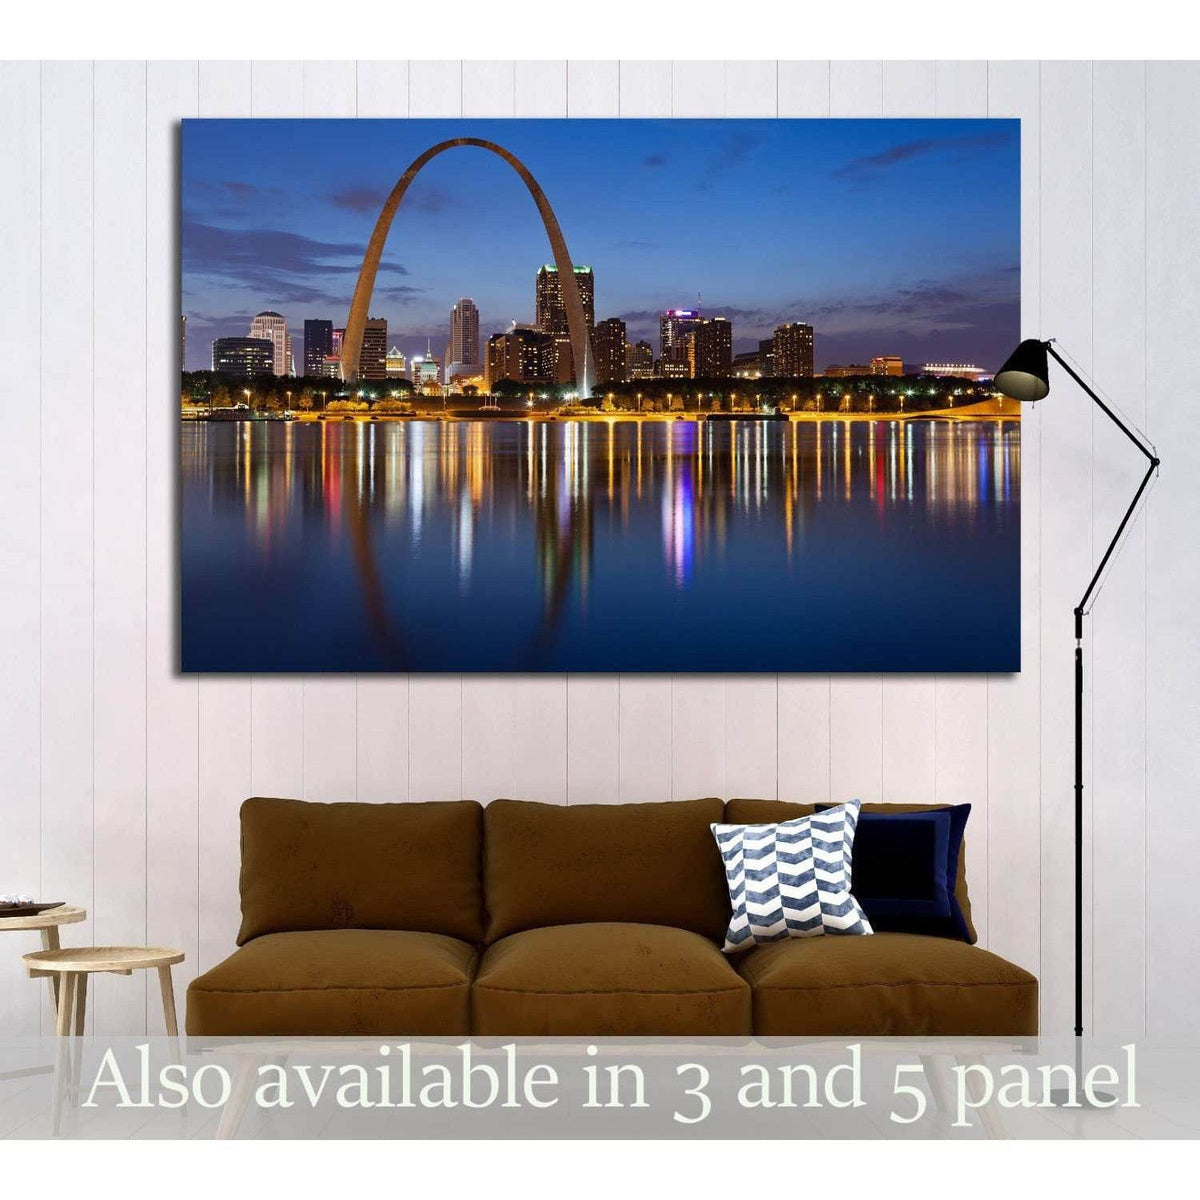 City of St. Louis skyline, Gateway Arch at twilight №2024 Ready to Han